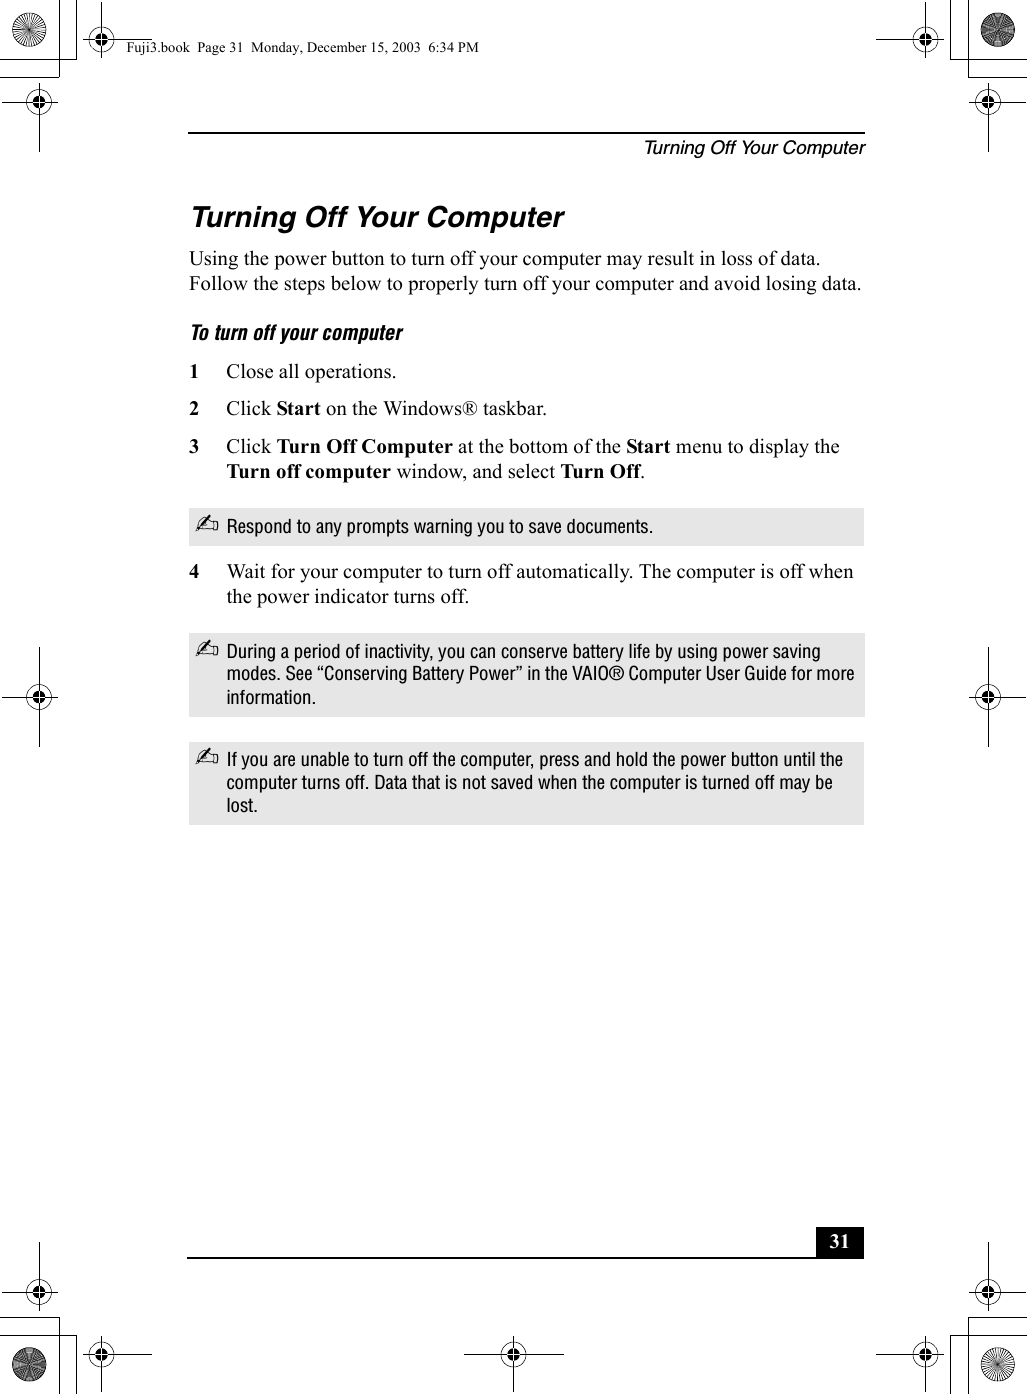 Turning Off Your Computer31Turning Off Your ComputerUsing the power button to turn off your computer may result in loss of data. Follow the steps below to properly turn off your computer and avoid losing data.To turn off your computer1Close all operations.2Click Start on the Windows® taskbar.3Click Turn Off Computer at the bottom of the Start menu to display the Turn off computer window, and select Turn Off.4Wait for your computer to turn off automatically. The computer is off when the power indicator turns off.✍Respond to any prompts warning you to save documents.✍During a period of inactivity, you can conserve battery life by using power saving modes. See “Conserving Battery Power” in the VAIO® Computer User Guide for more information.✍If you are unable to turn off the computer, press and hold the power button until the computer turns off. Data that is not saved when the computer is turned off may be lost.Fuji3.book  Page 31  Monday, December 15, 2003  6:34 PM